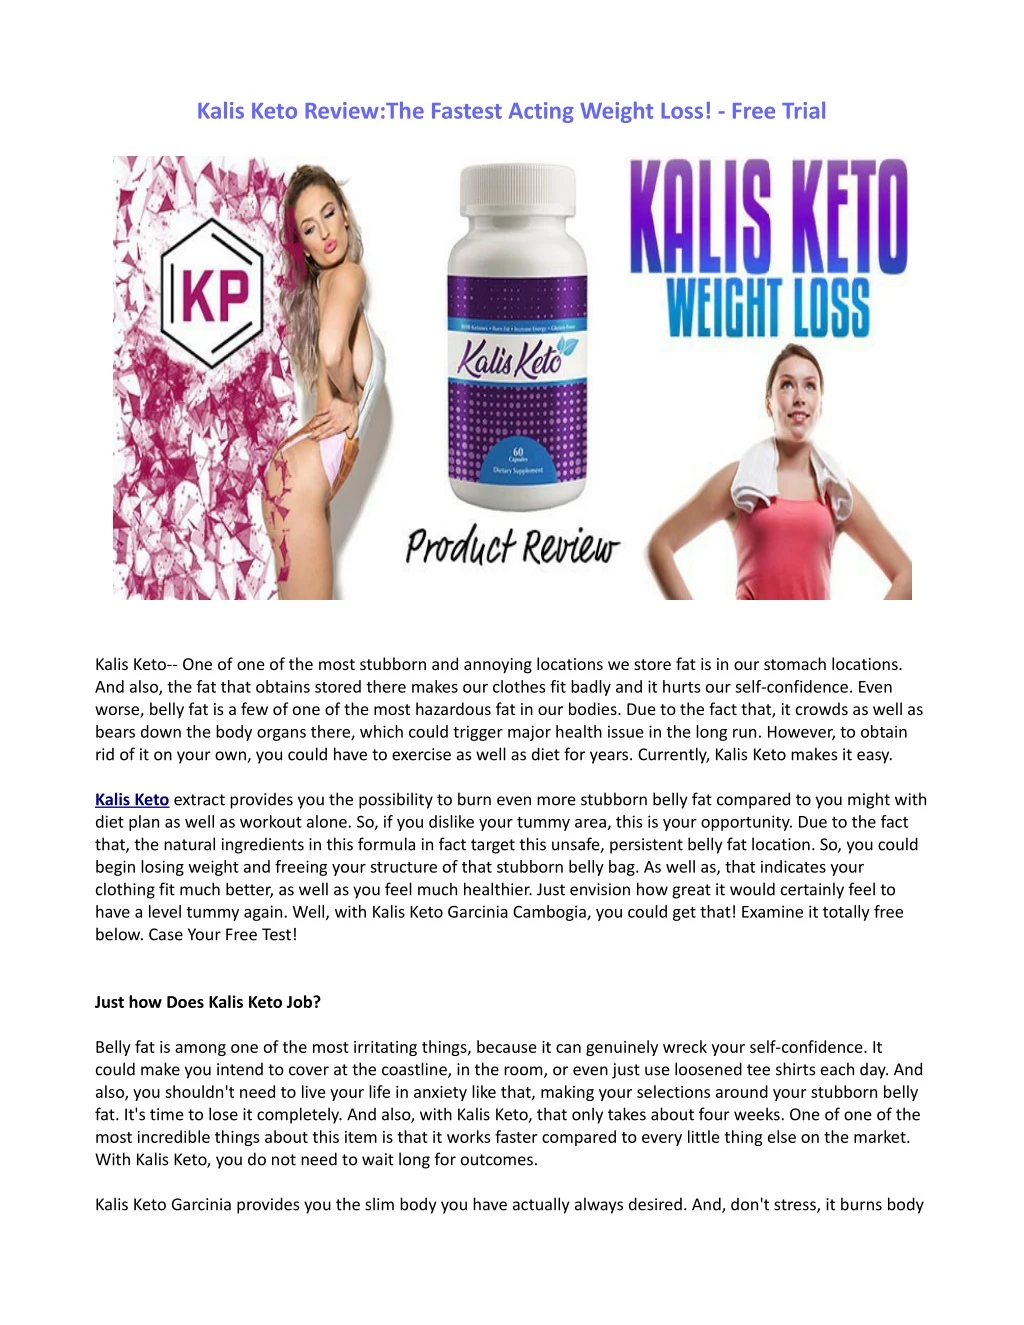 kalis keto review the fastest acting weight loss